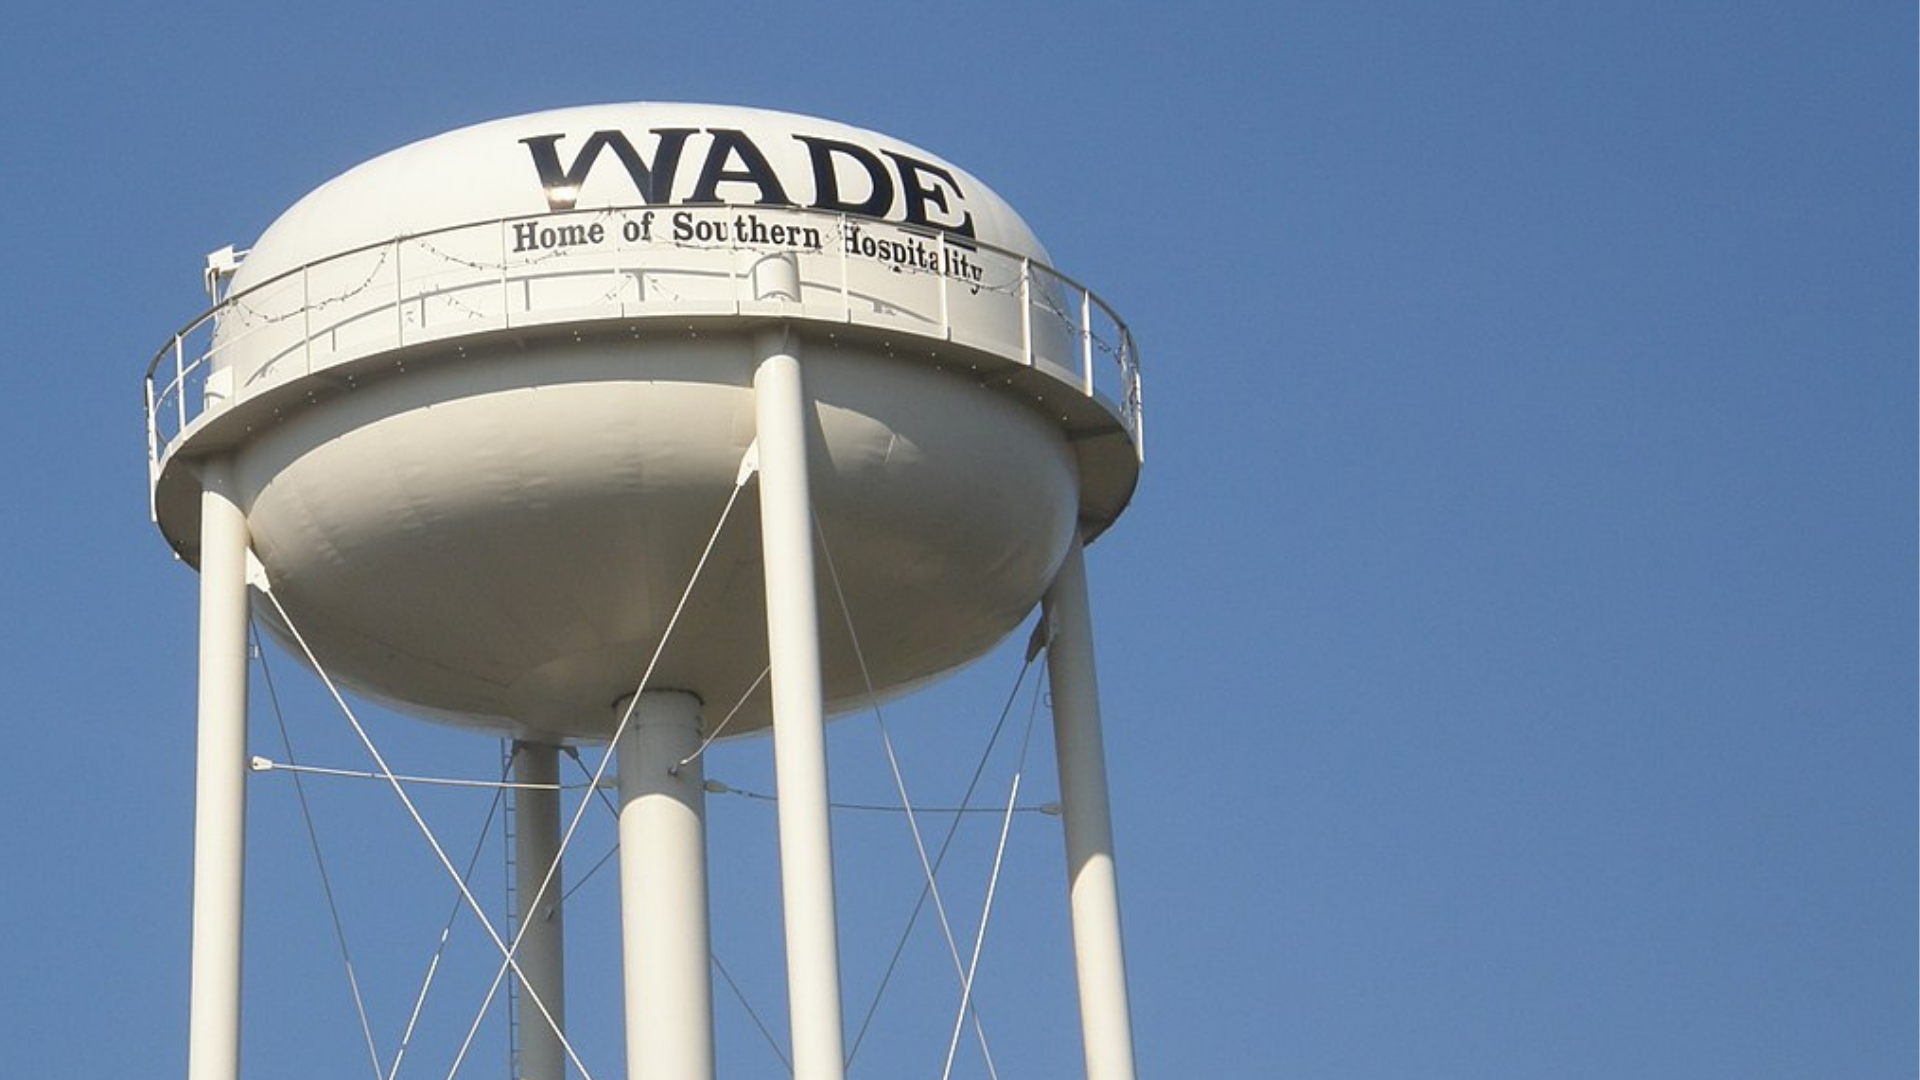 Town of Wade